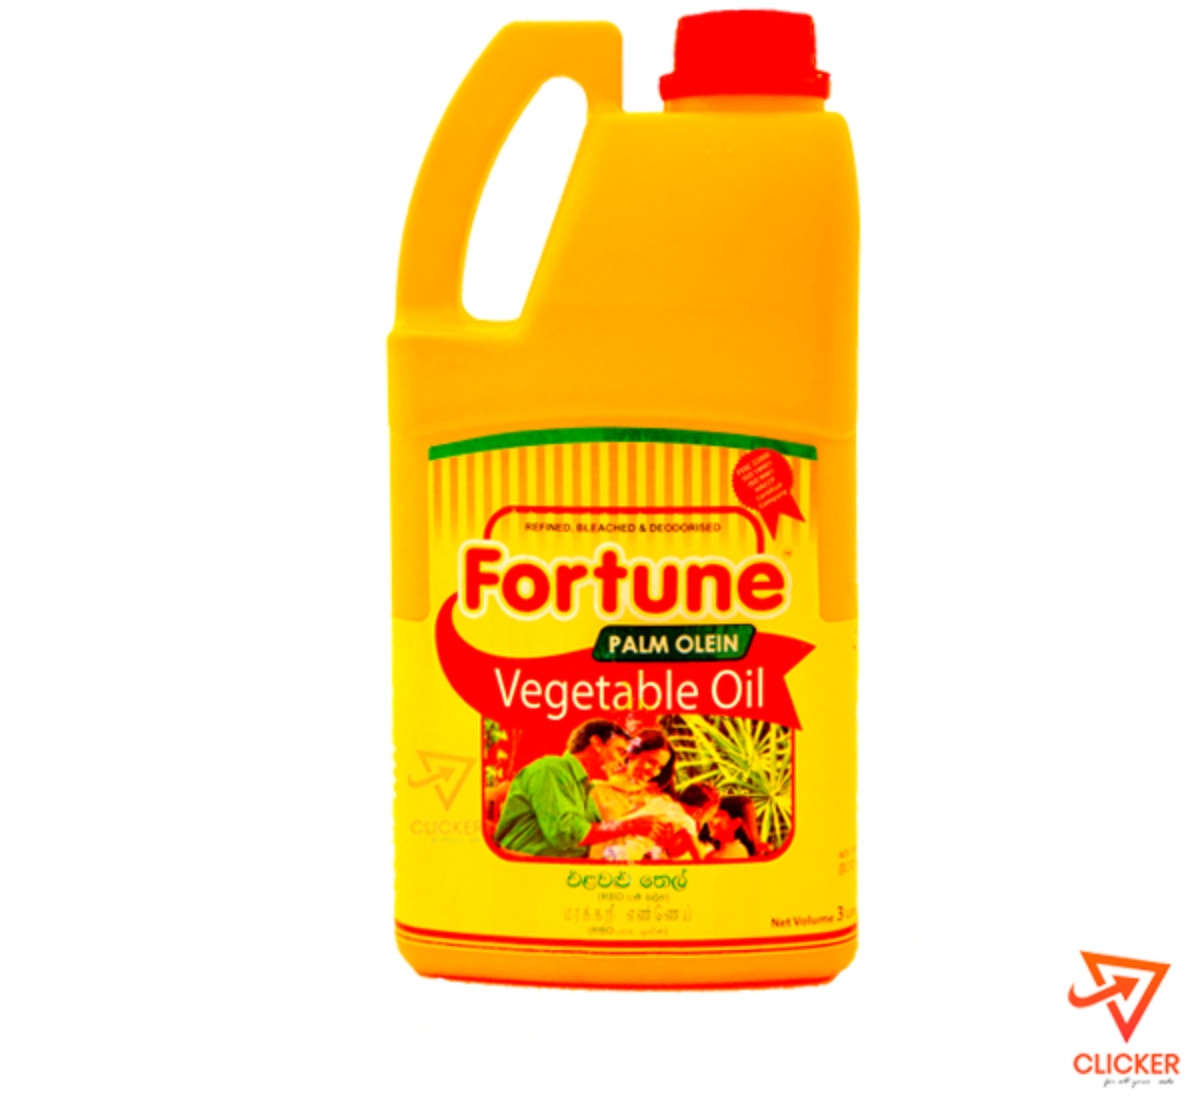 Clicker product 3L fortune vegetable oil 1171